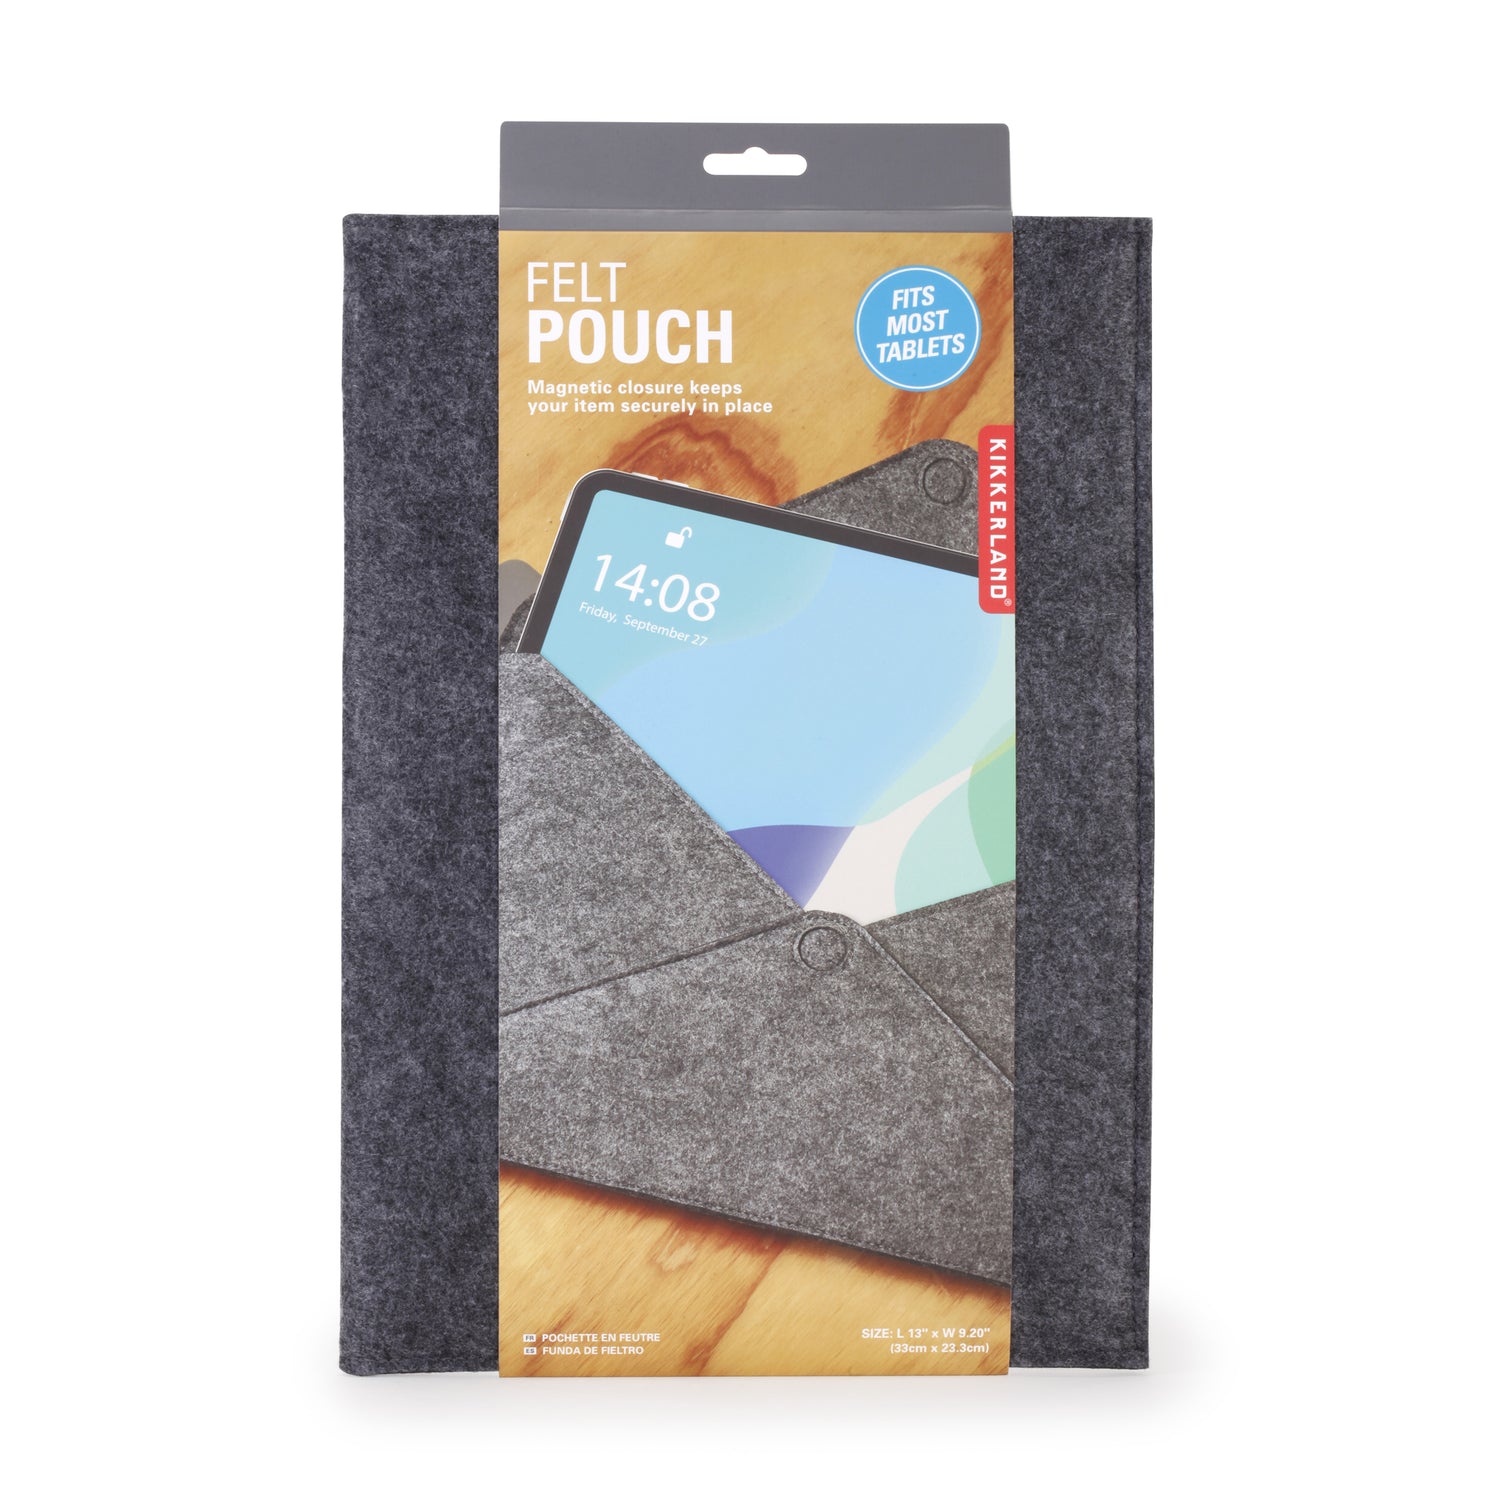 Stores and protects iPads & tablets, with magnetic clasp closure. , Design: KDT , Material: polyester , Prod. Dim: 33,3 x 23,5 x ,2 cm , Pkg. Dim.: 23,5 x 37 x 1 cm